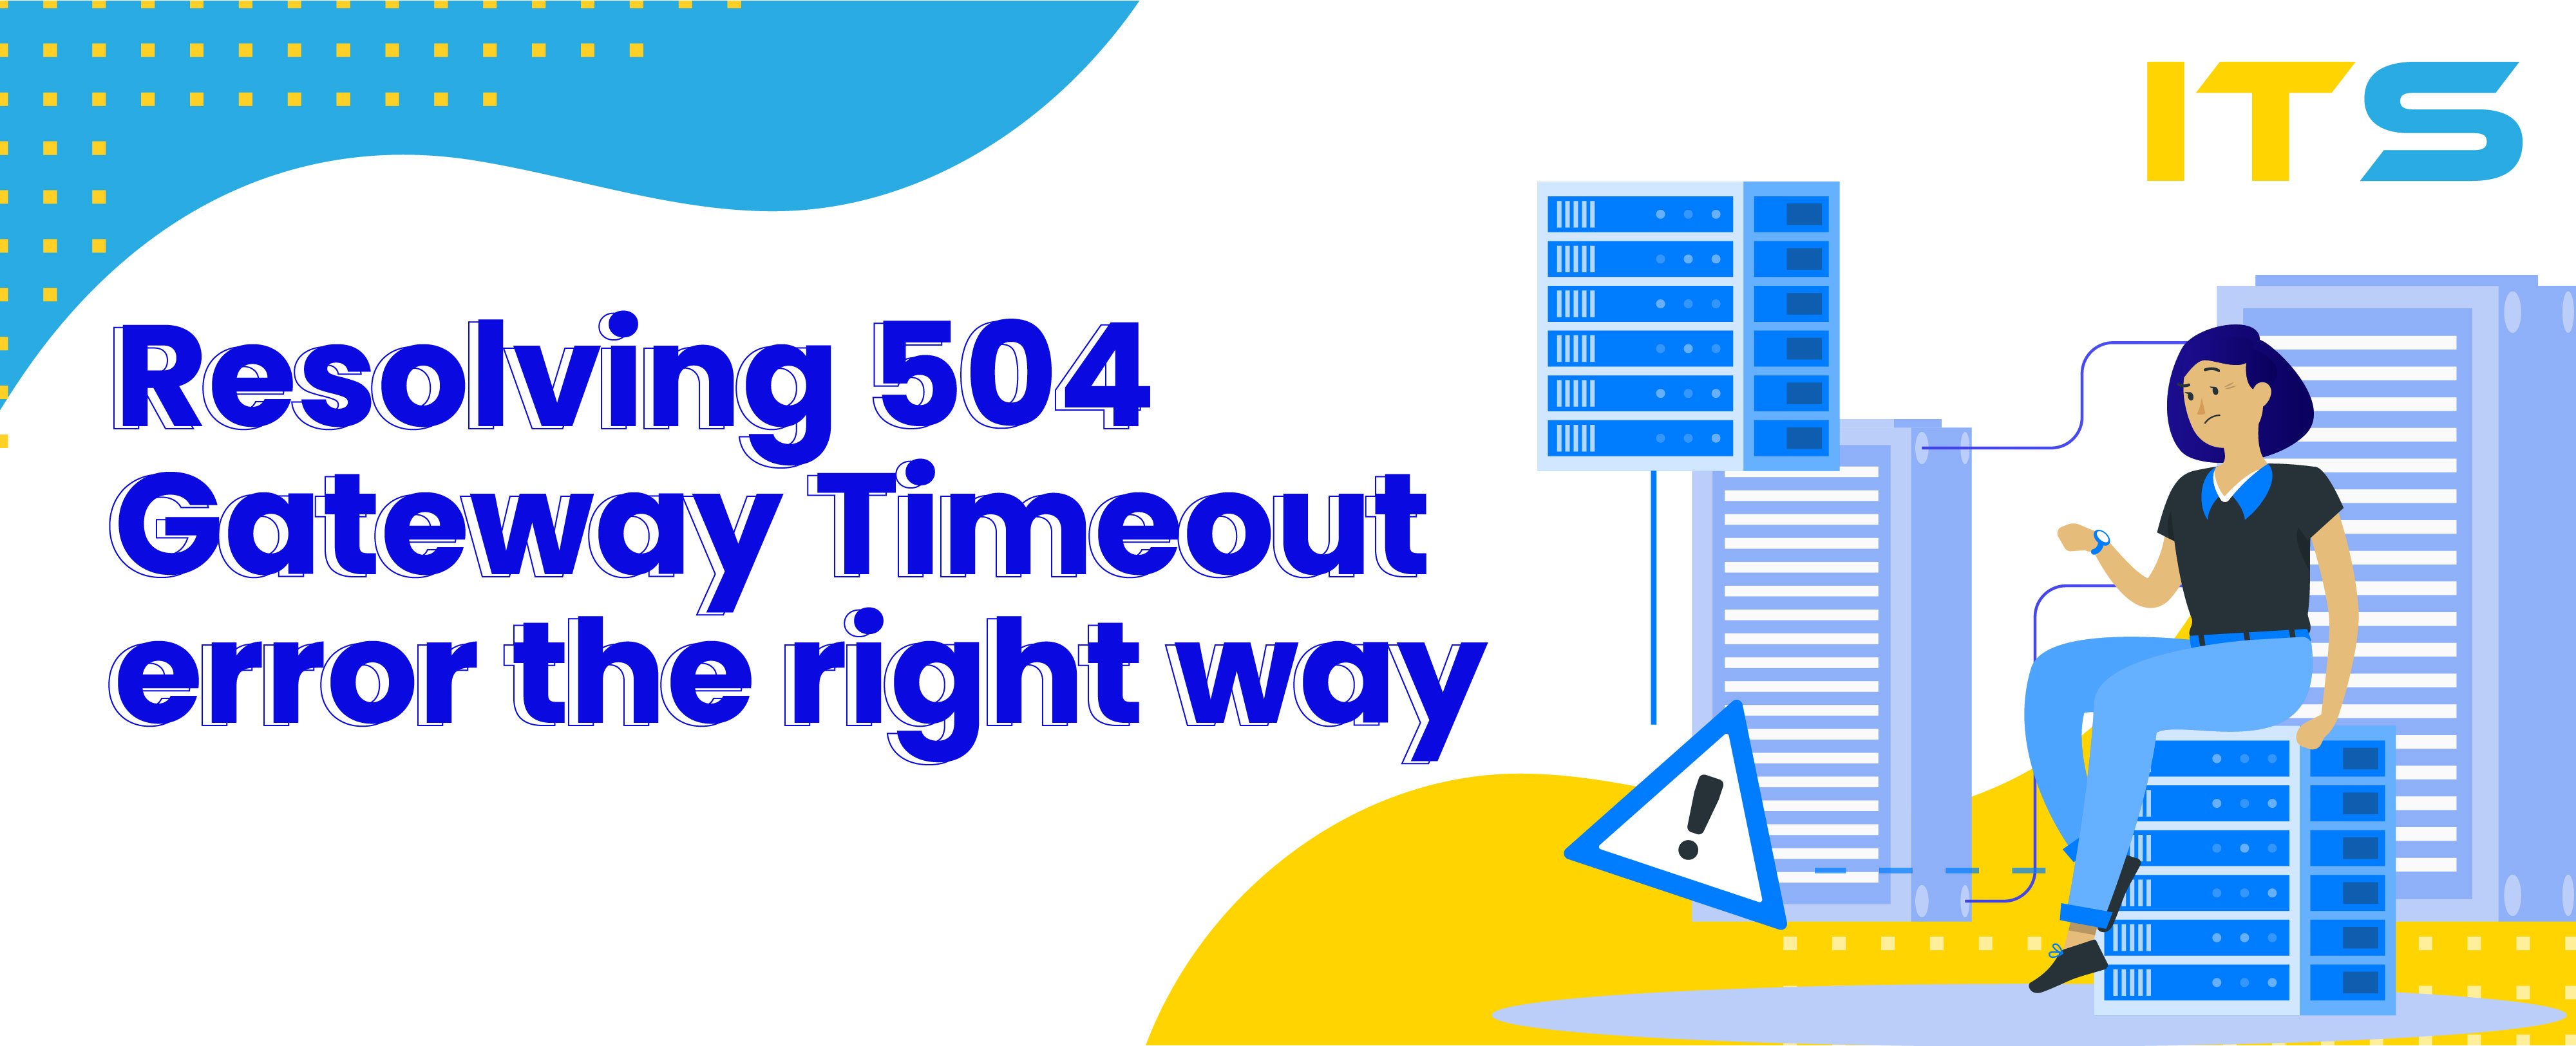 Resolving_504_Gateway_Timeout_error_the_right way